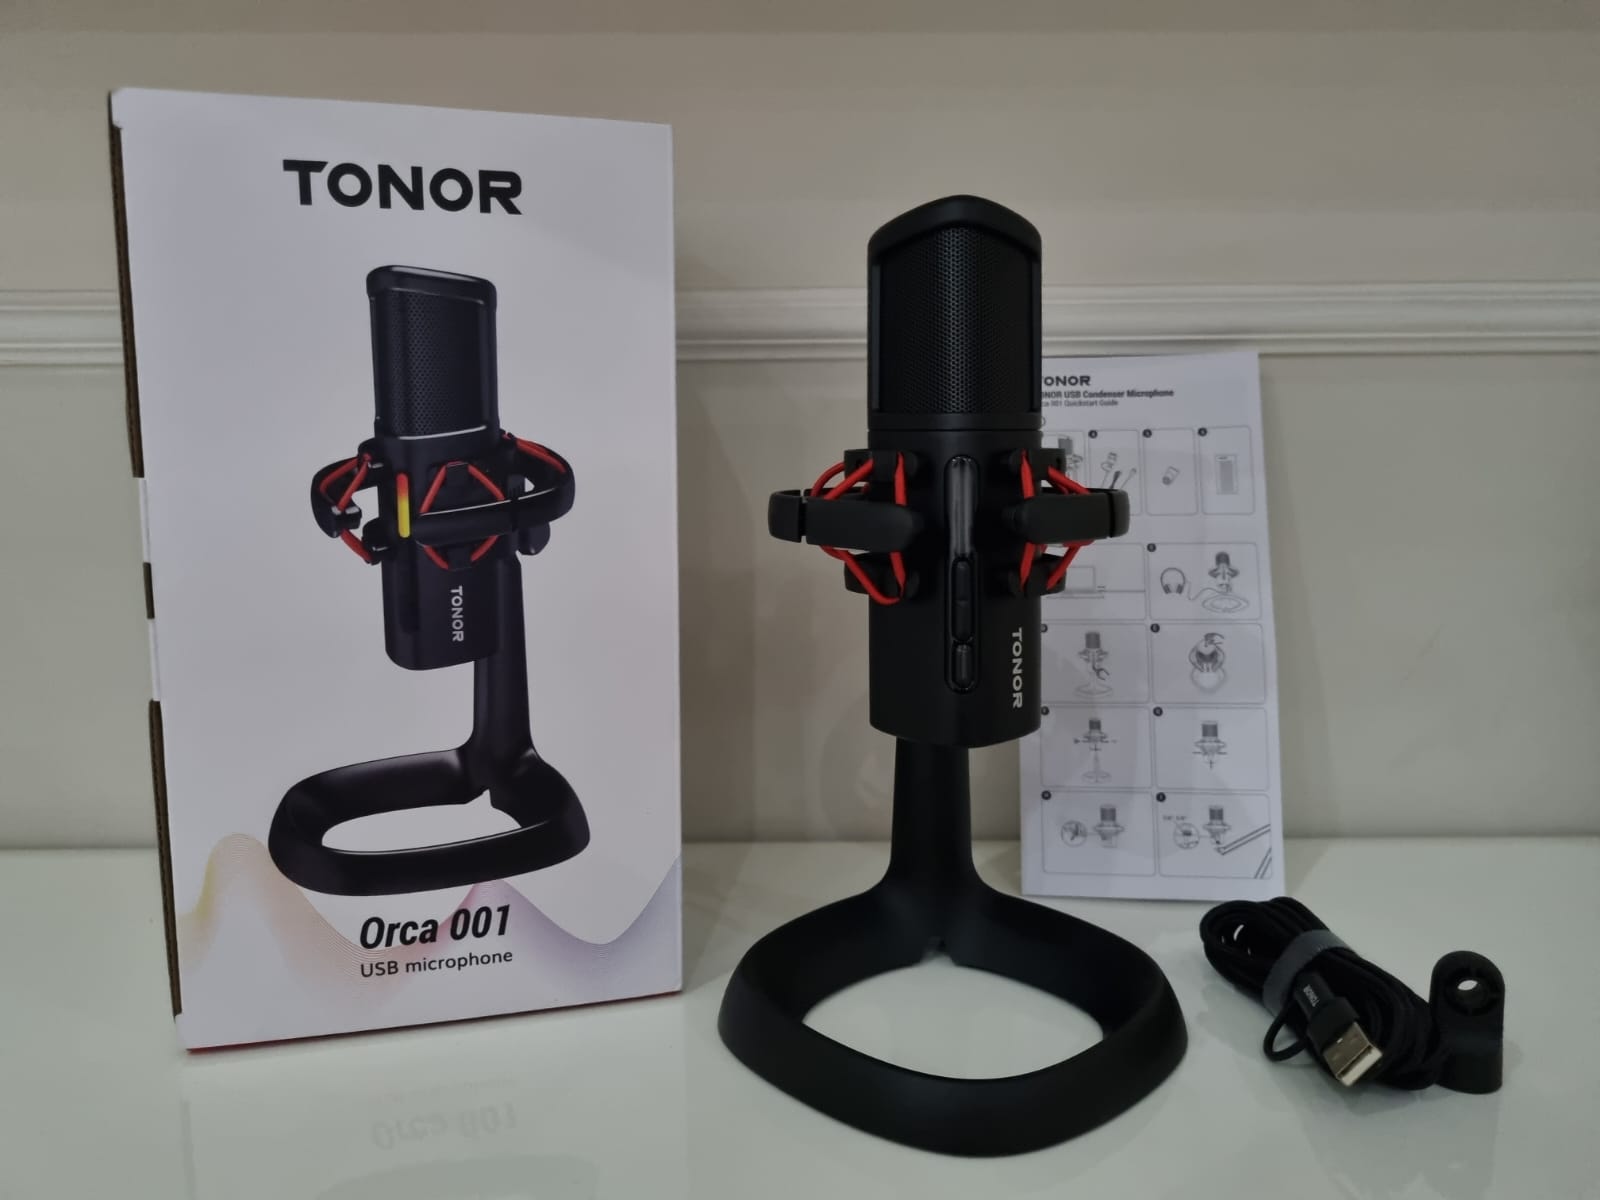 Tonor Orca 001 review: USB microphone passed with flying colors!